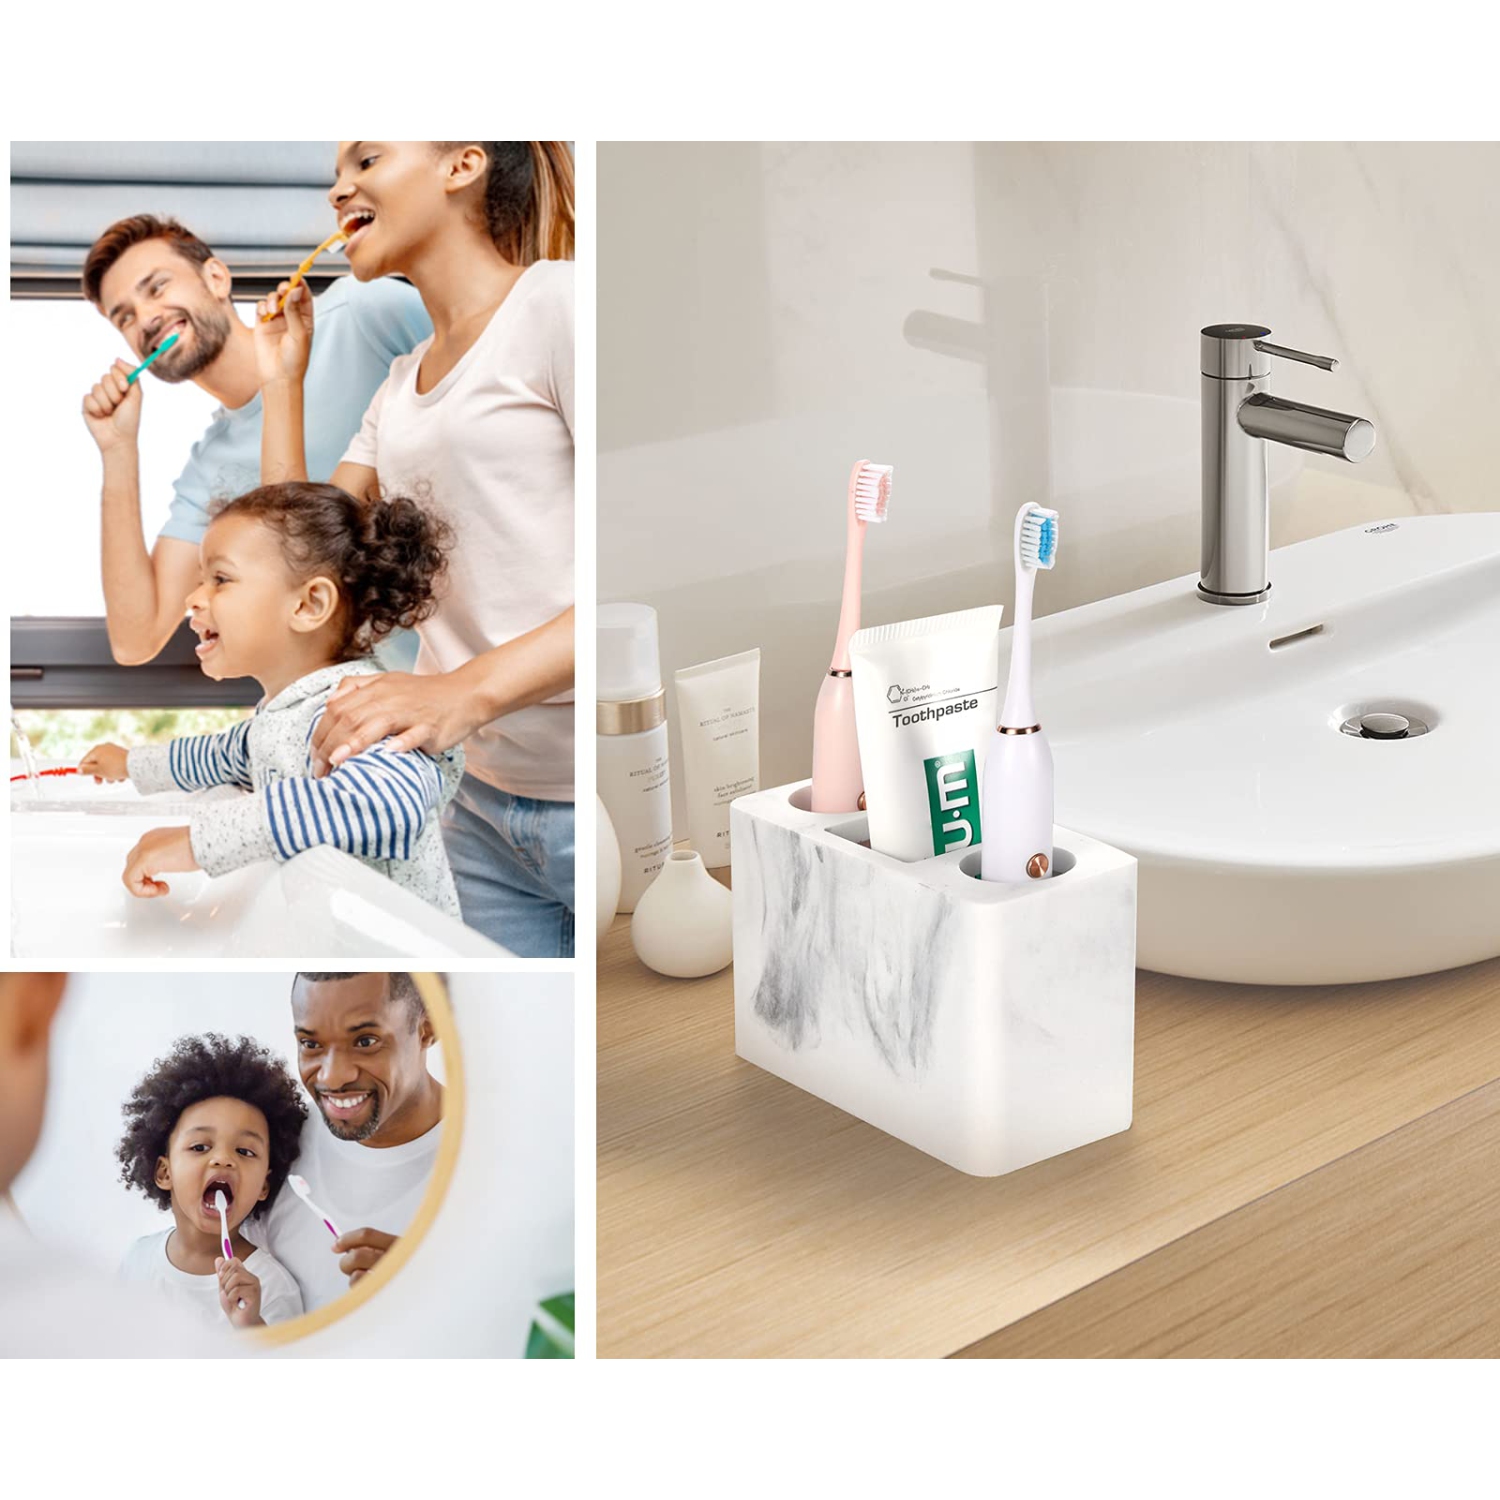  Ayswupt Black Toothbrush Holder for Bathroom,Detactable Bathroom  Tray for Men,Electric Tooth Brushing Holder,Bathroom Countertop Organizer,Tooth  Brush Toothpaste Caddy Storage,Vanity Sink Accessories : Home & Kitchen